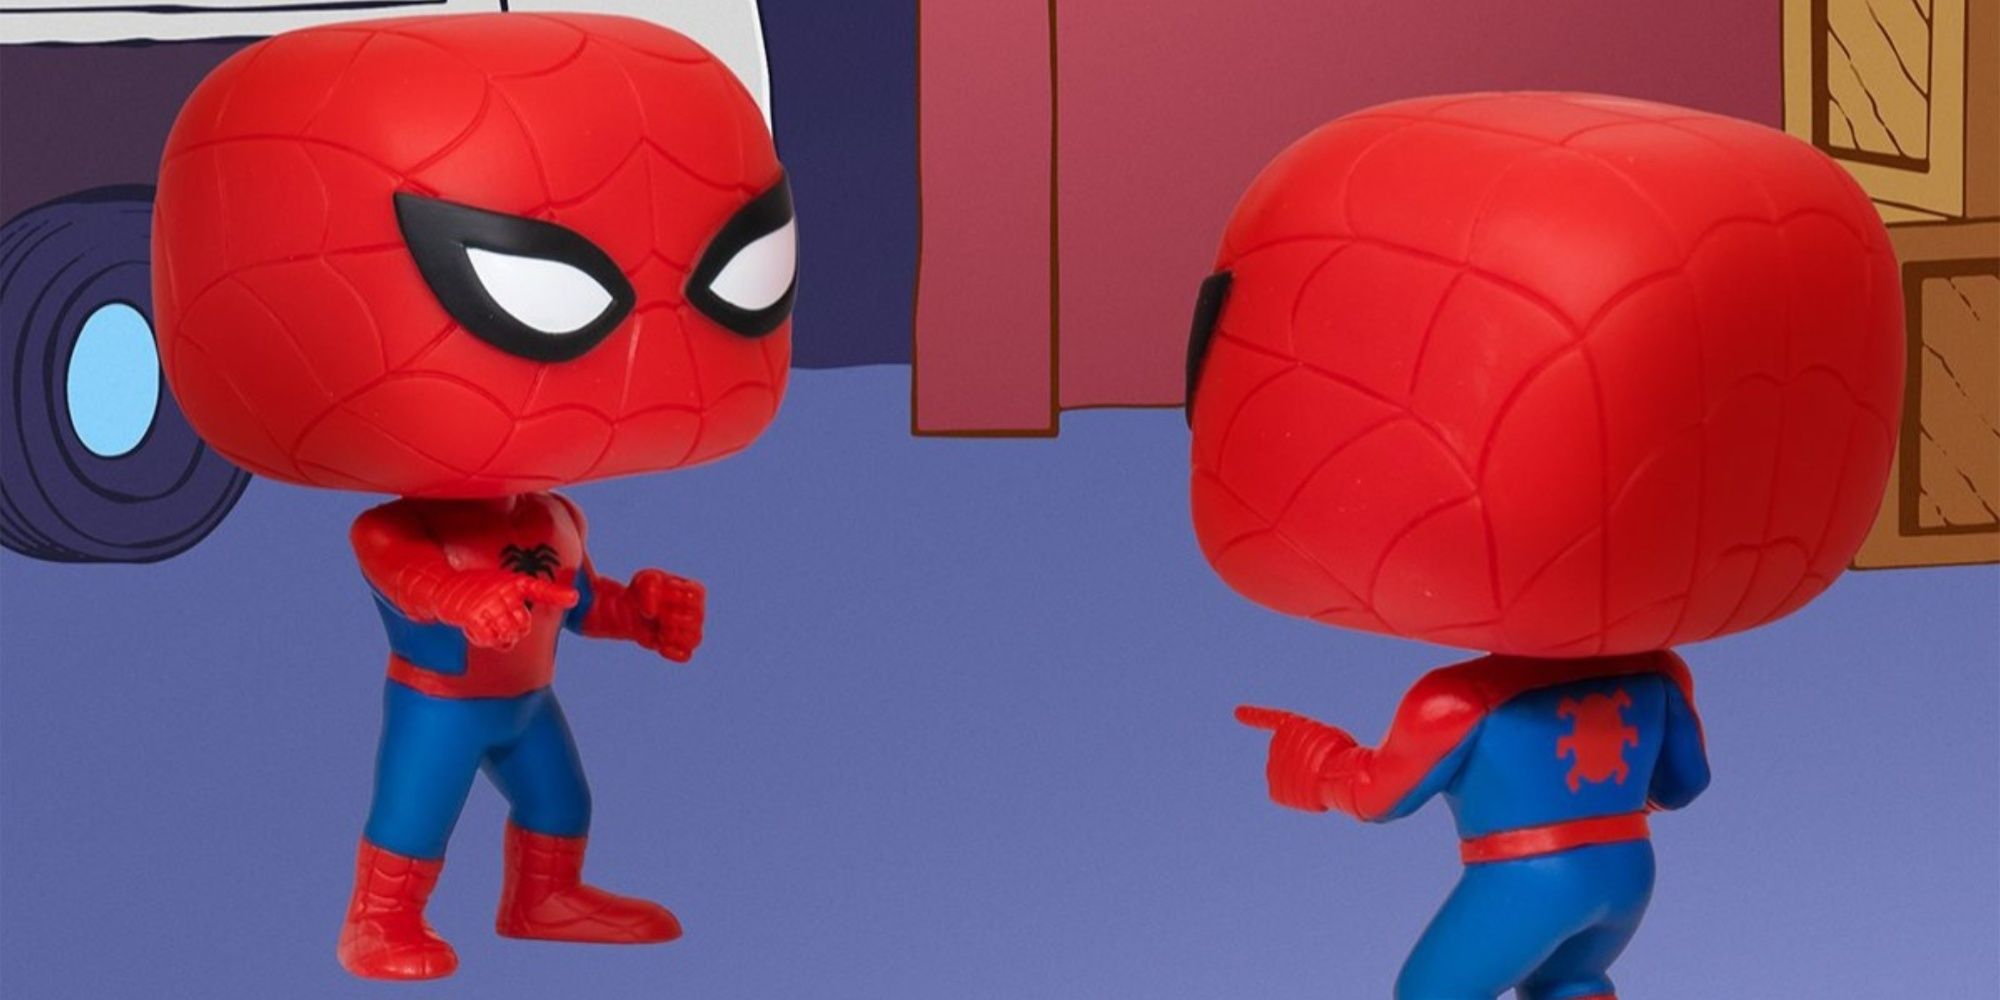 spider-man imposter funko pops pointing at each other